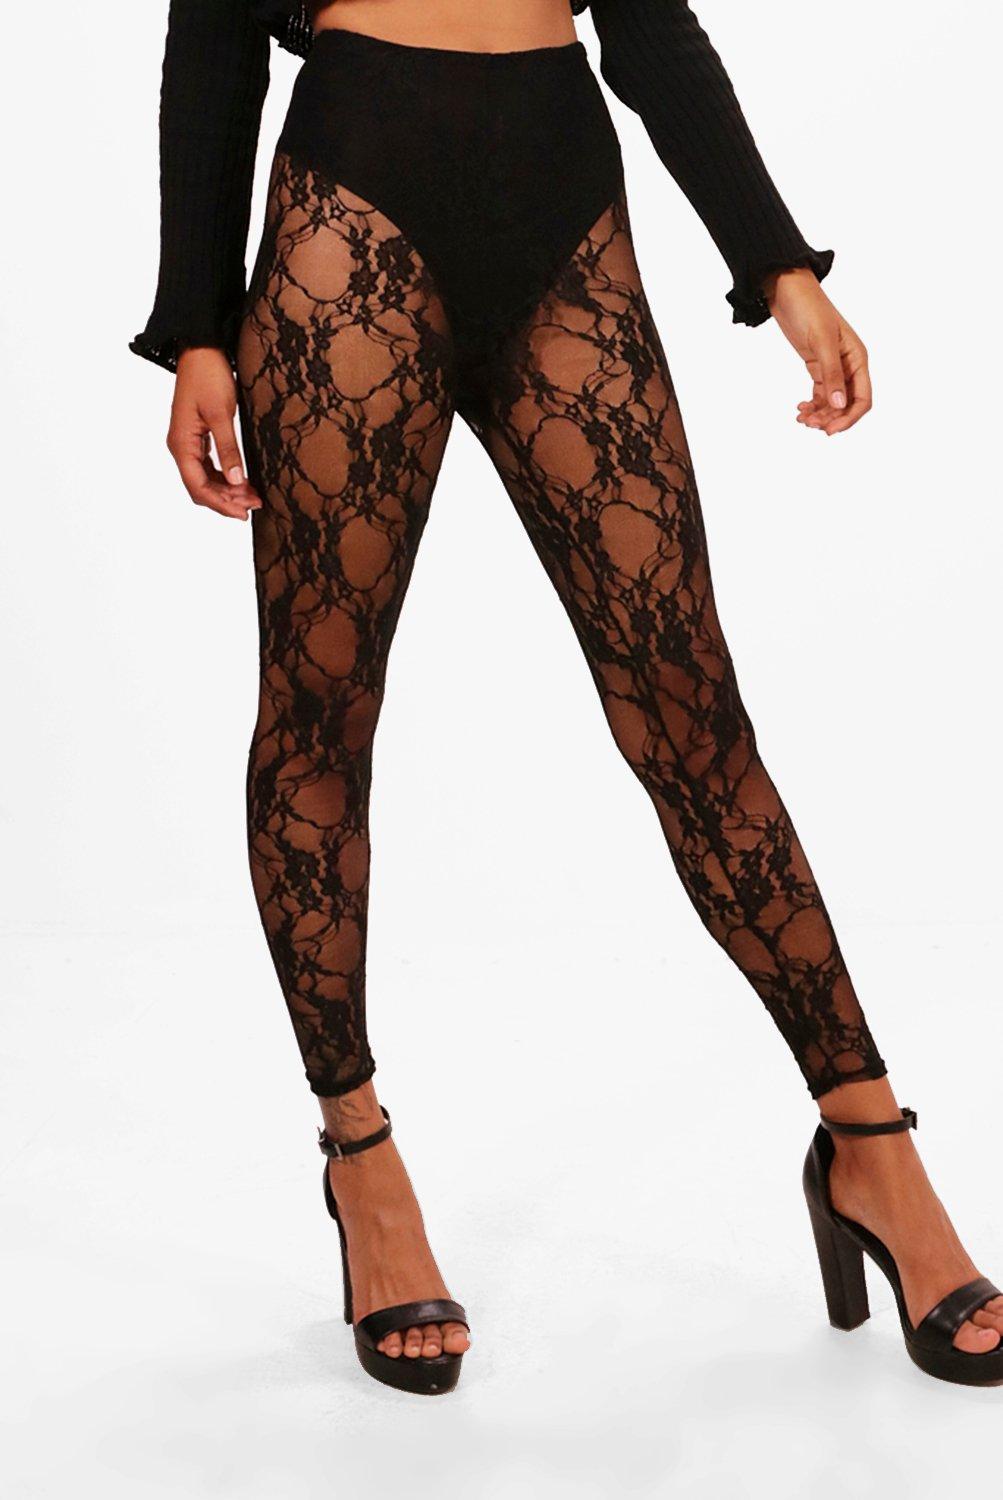 Lace Leggings With Knicker Short